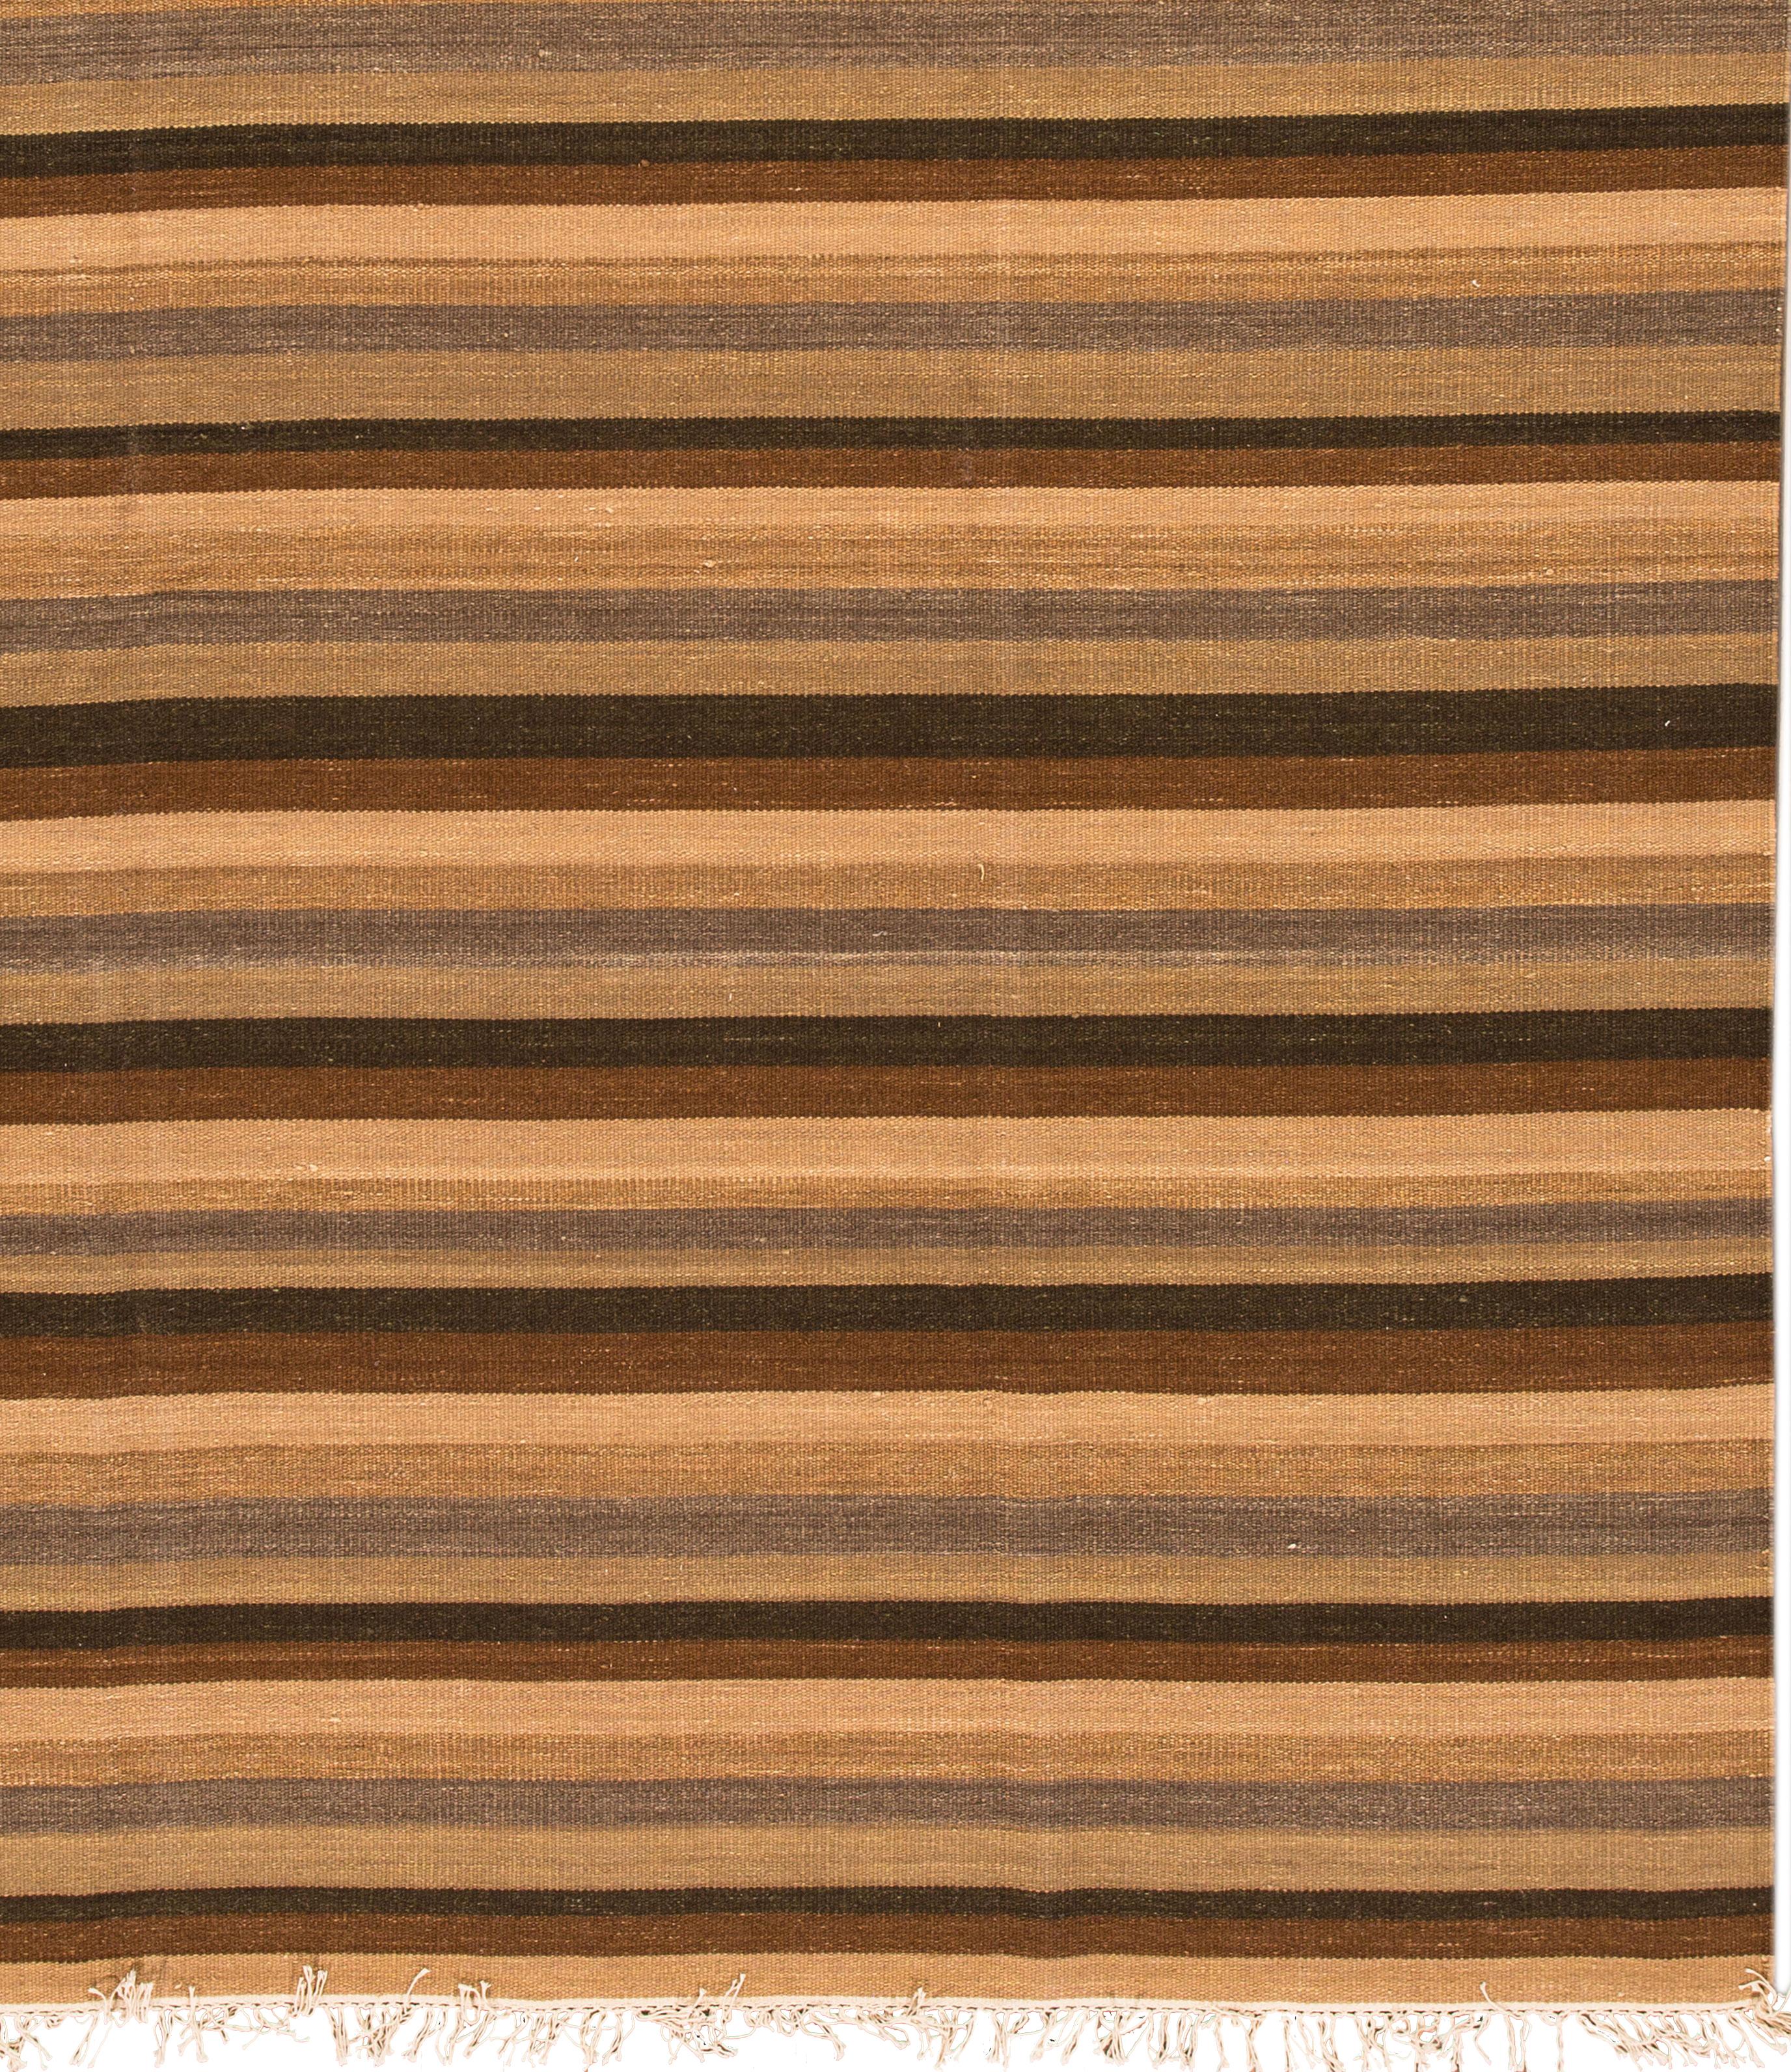 21st century Turkish Kilim rug, hand knotted wool with an all-over striped dark brown, light brown and tan field.
This rug measures 7' 10